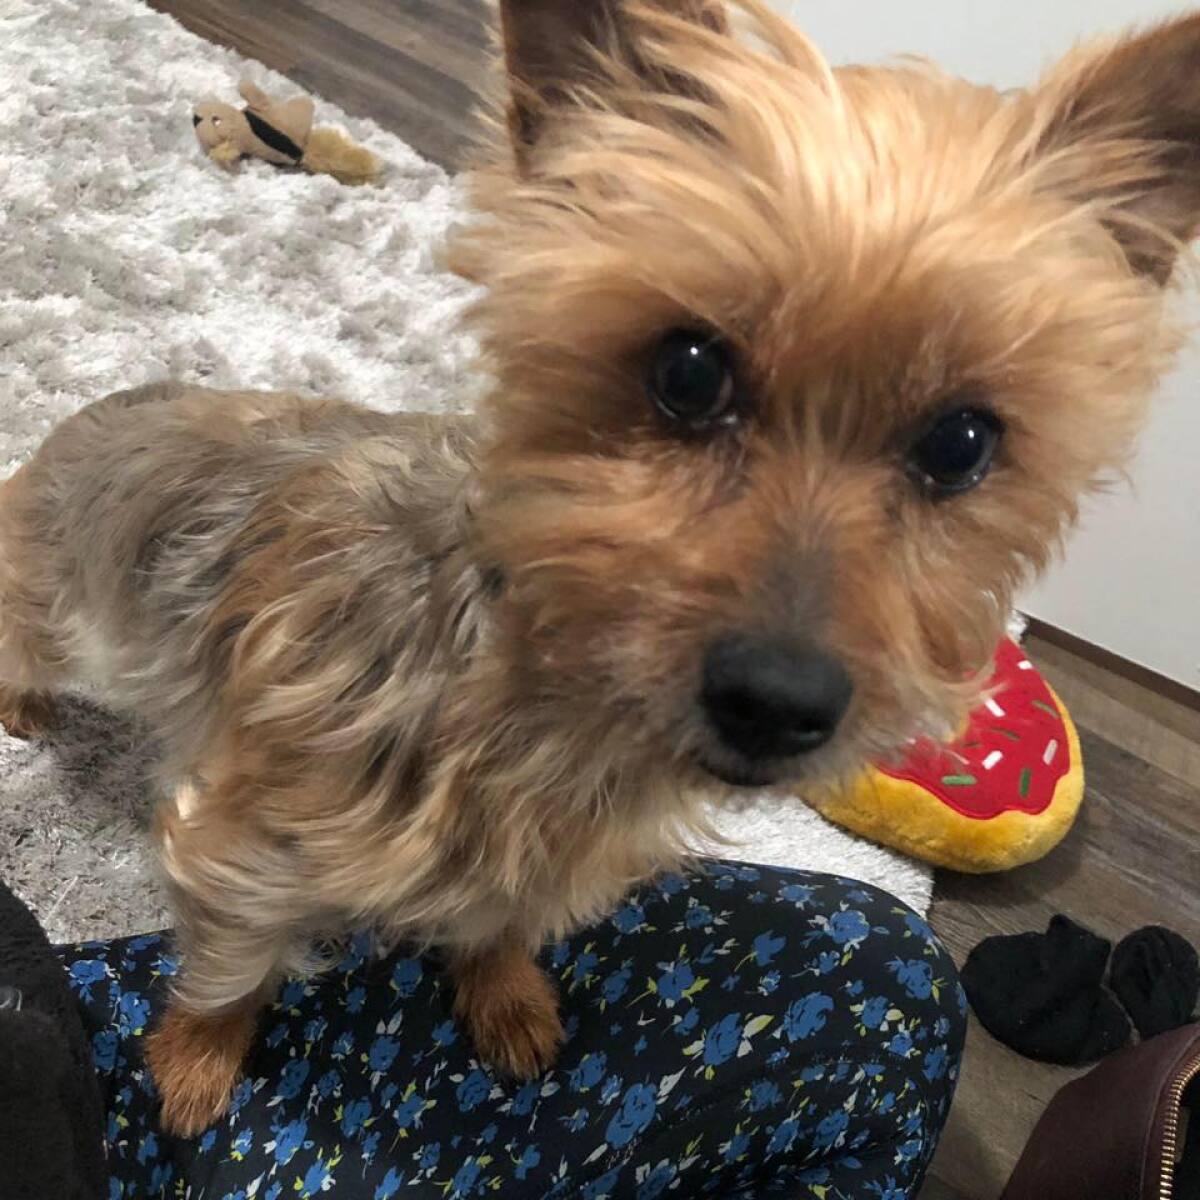 Presley, a Silky Terrier, was attacked and killed by coyotes last week in Santee.